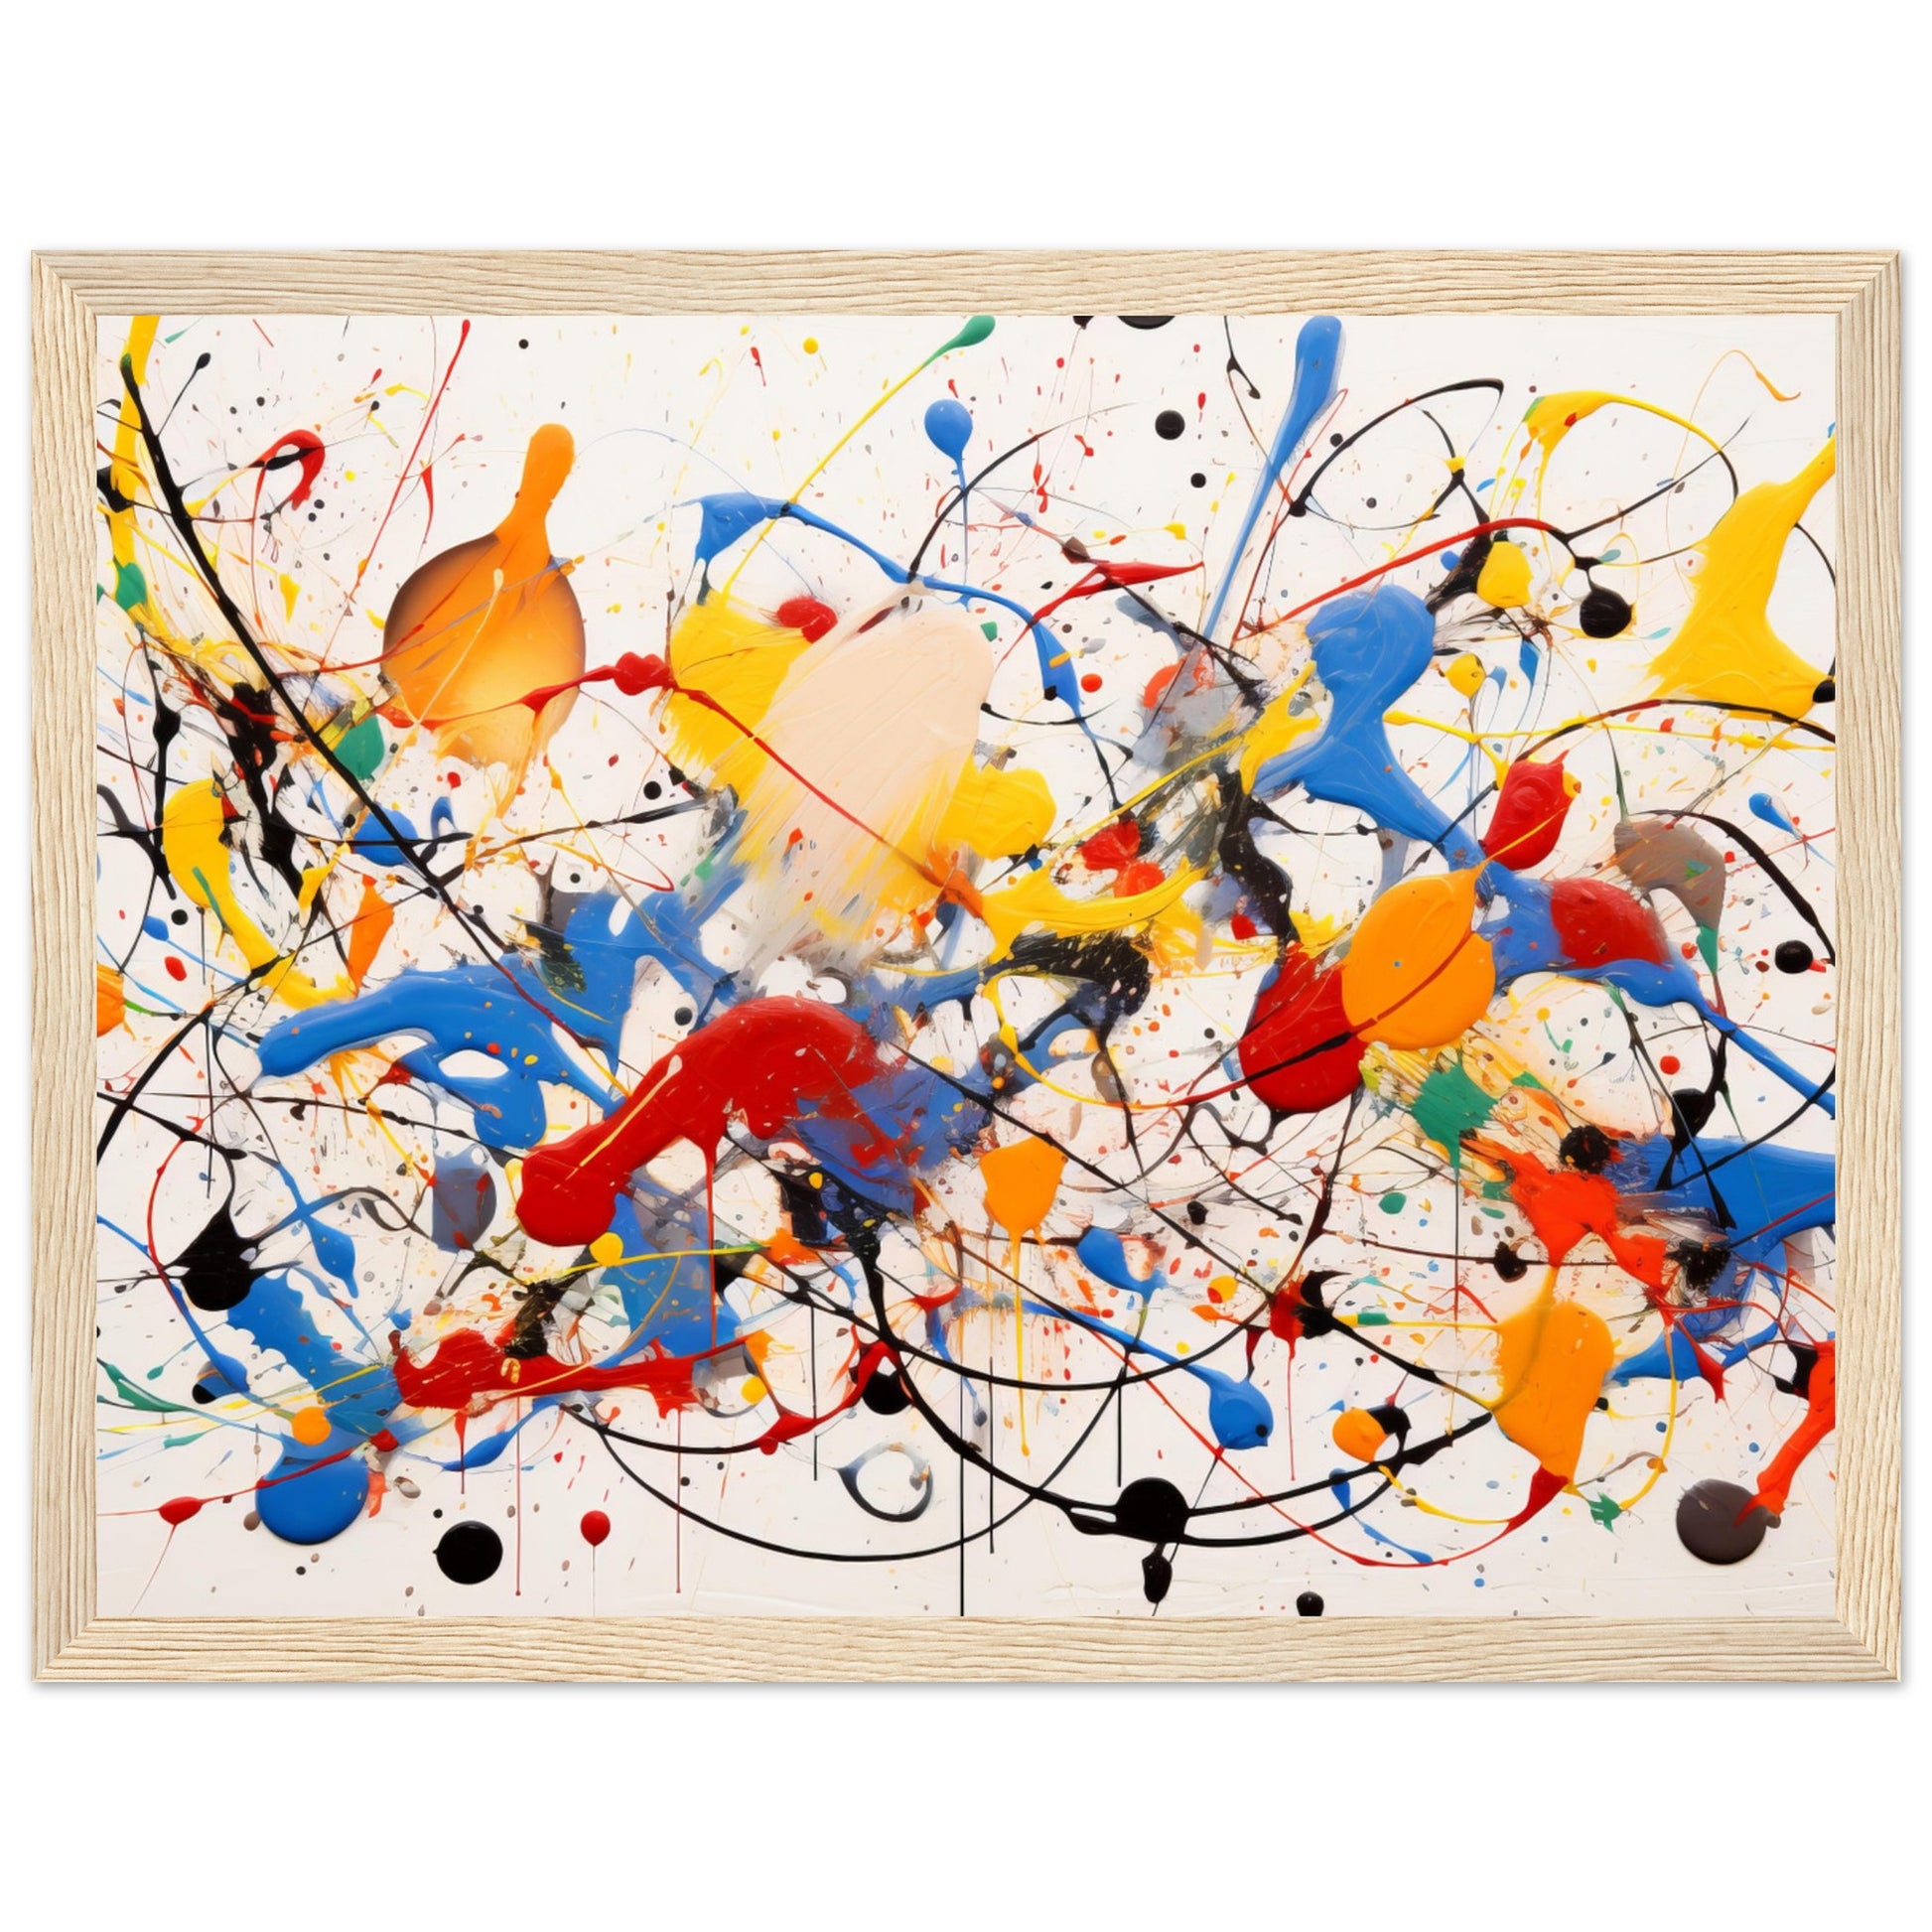 Dynamic Abstract Art Print #17 - Inspired by Pollock White frame 30x40 cm / 12x16"